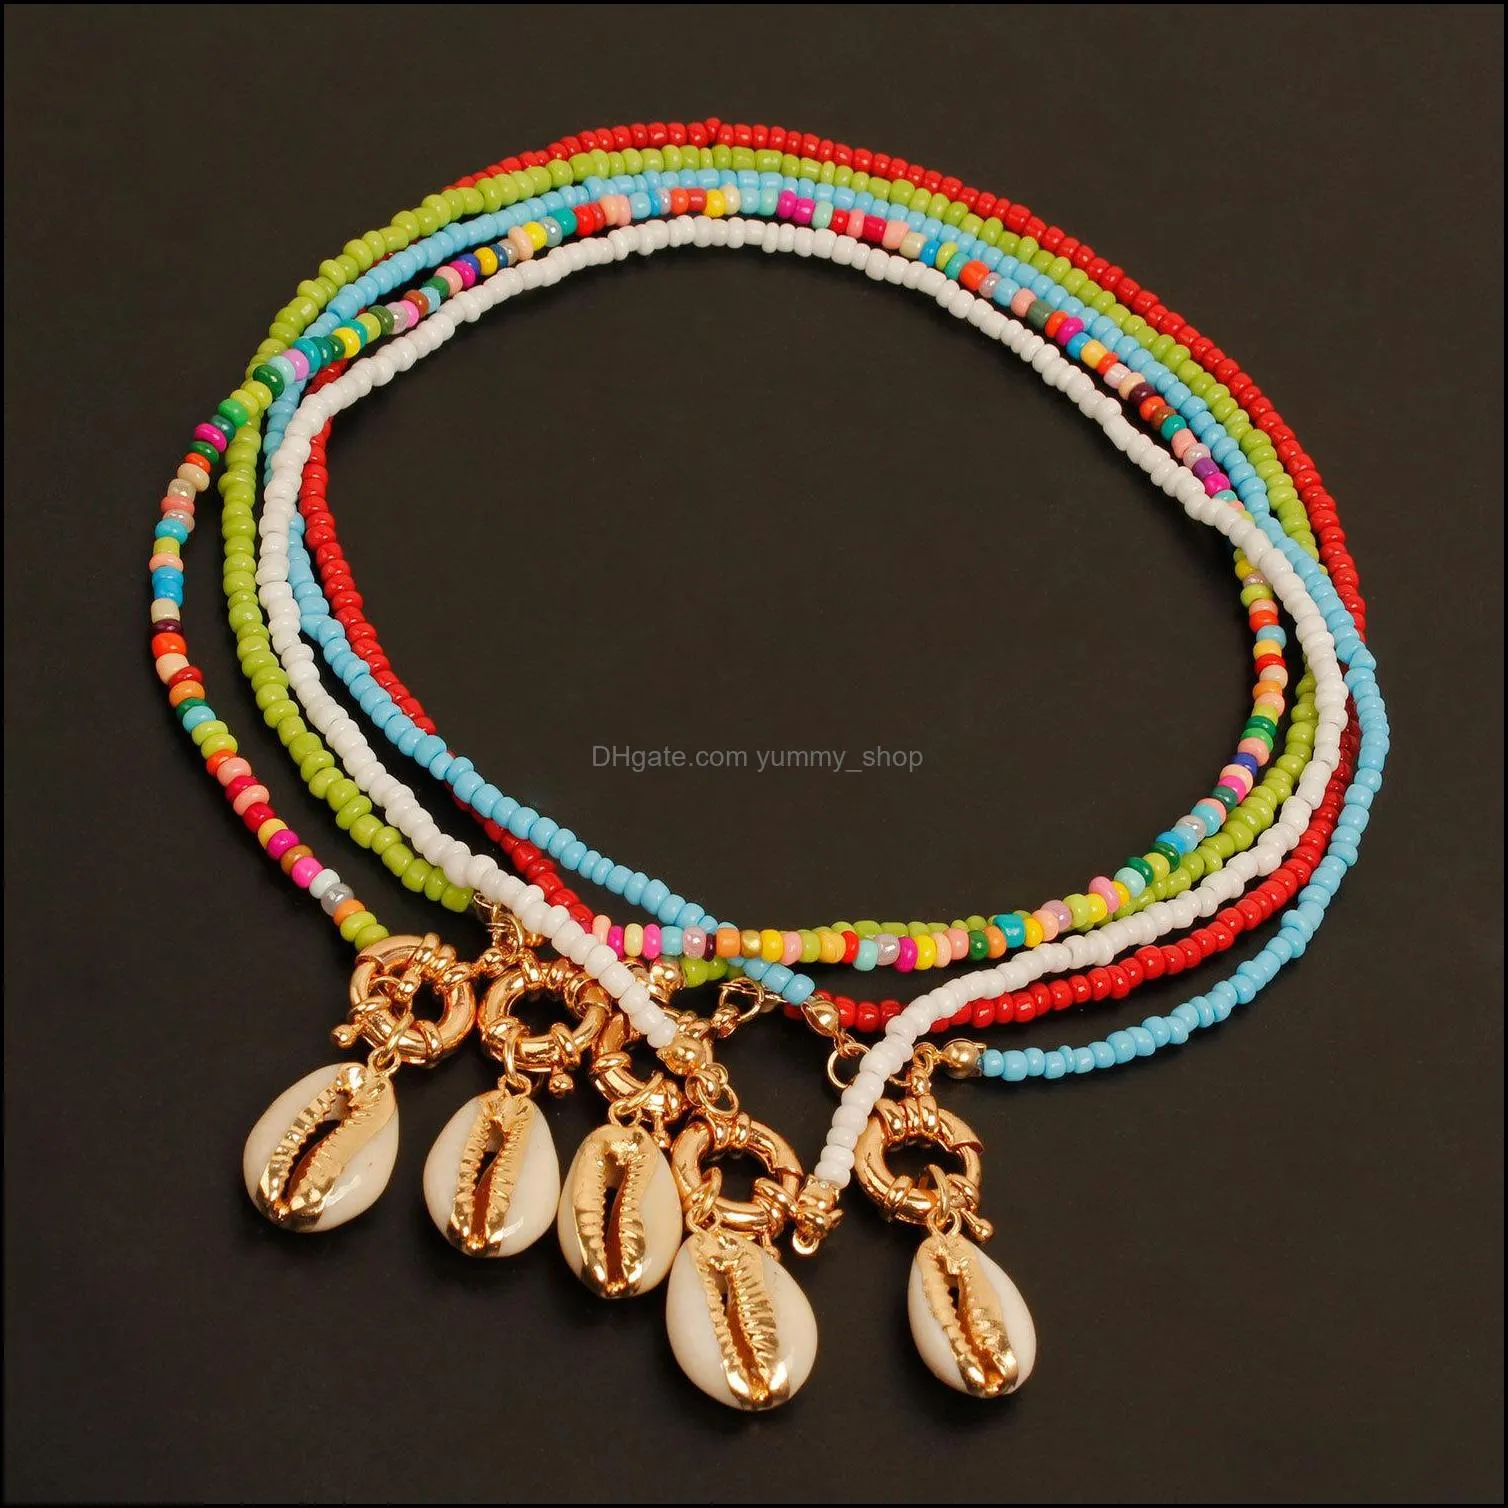 fashion creative shell pendant necklace womens boho retro summer gothic beads hand threaded colorful rope rice beads shell pendant